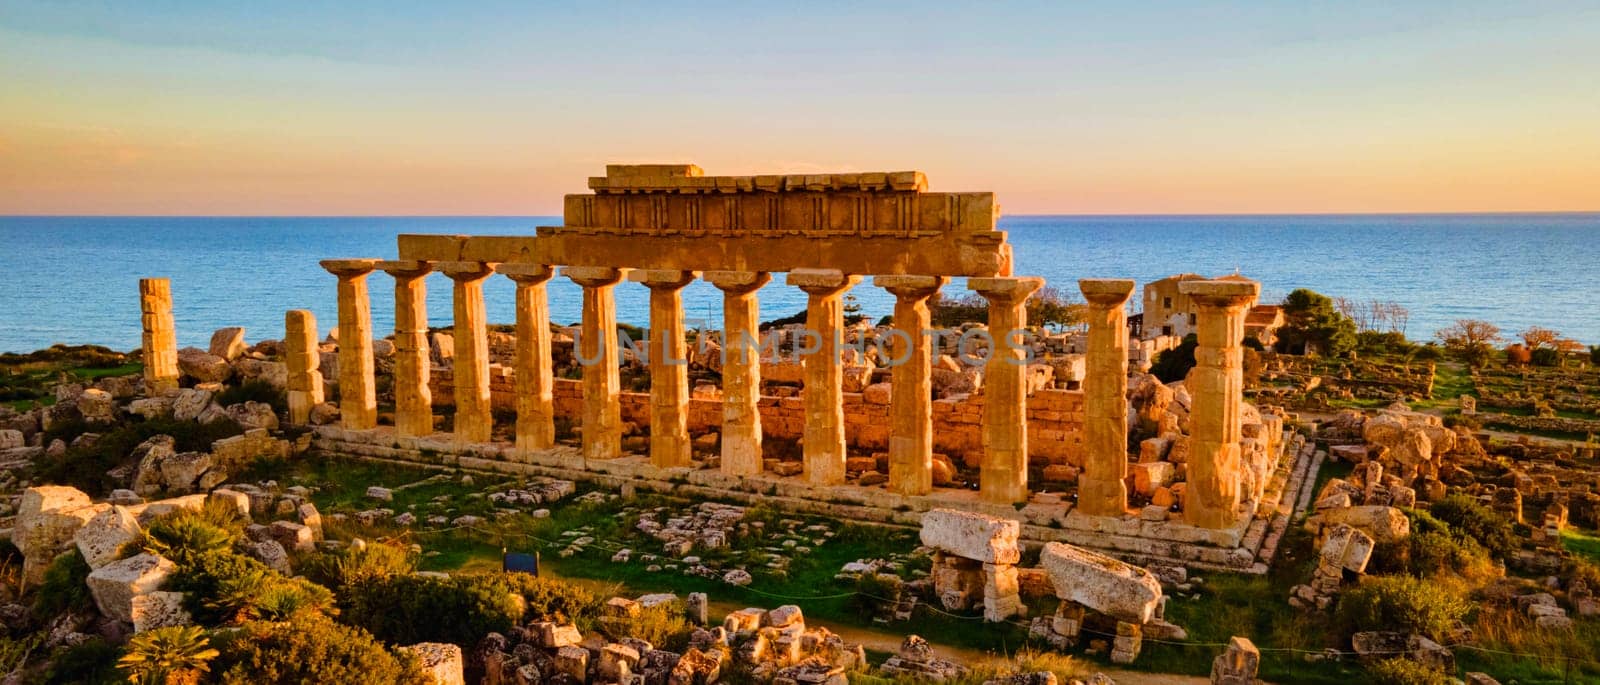 Greek temples at Selinunte, View of the sea, and ruins of Greek columns in Selinunte Archaeological Park Sicily Italy